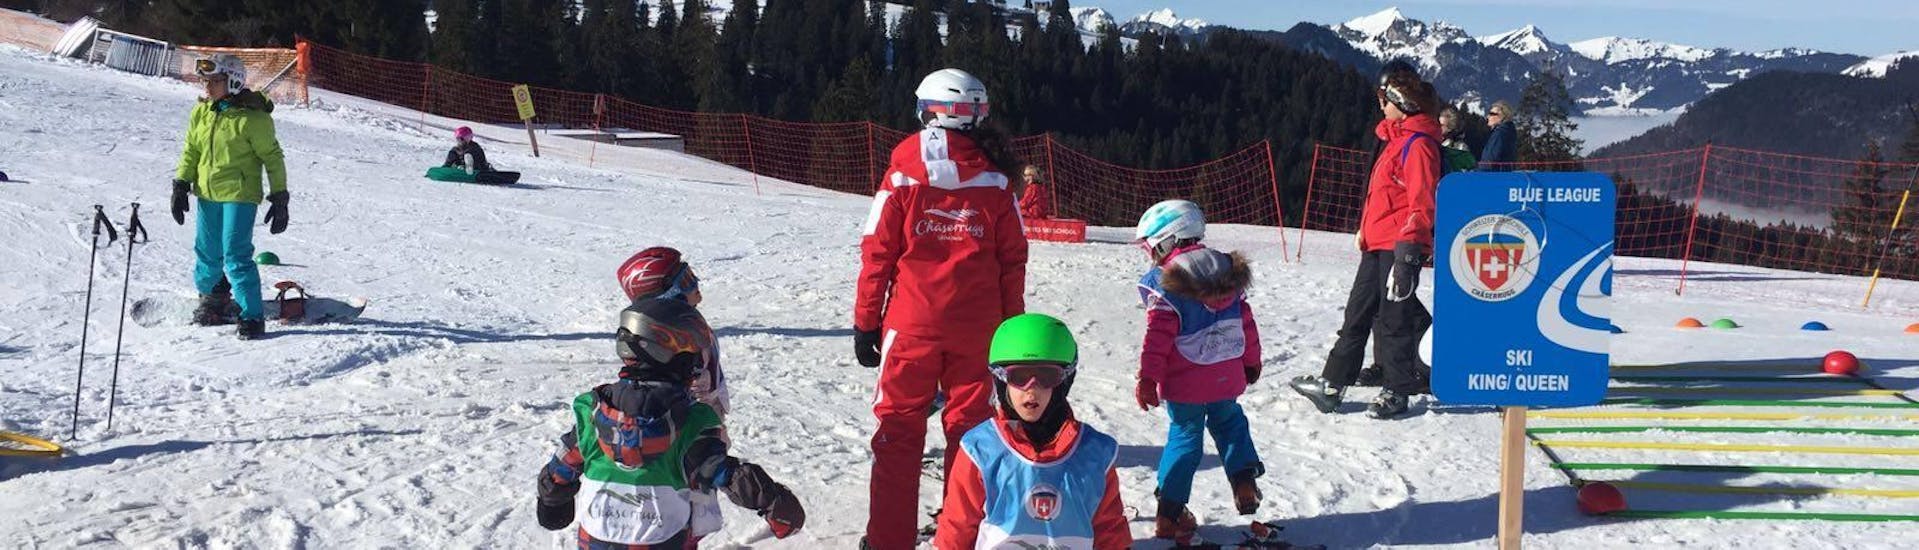 Young skiers are getting ready their Kids Ski Lessons (3-5 years) - Beginners with Swiss Ski School Chäserrugg at the assemly point, where they meet their ski instructor.